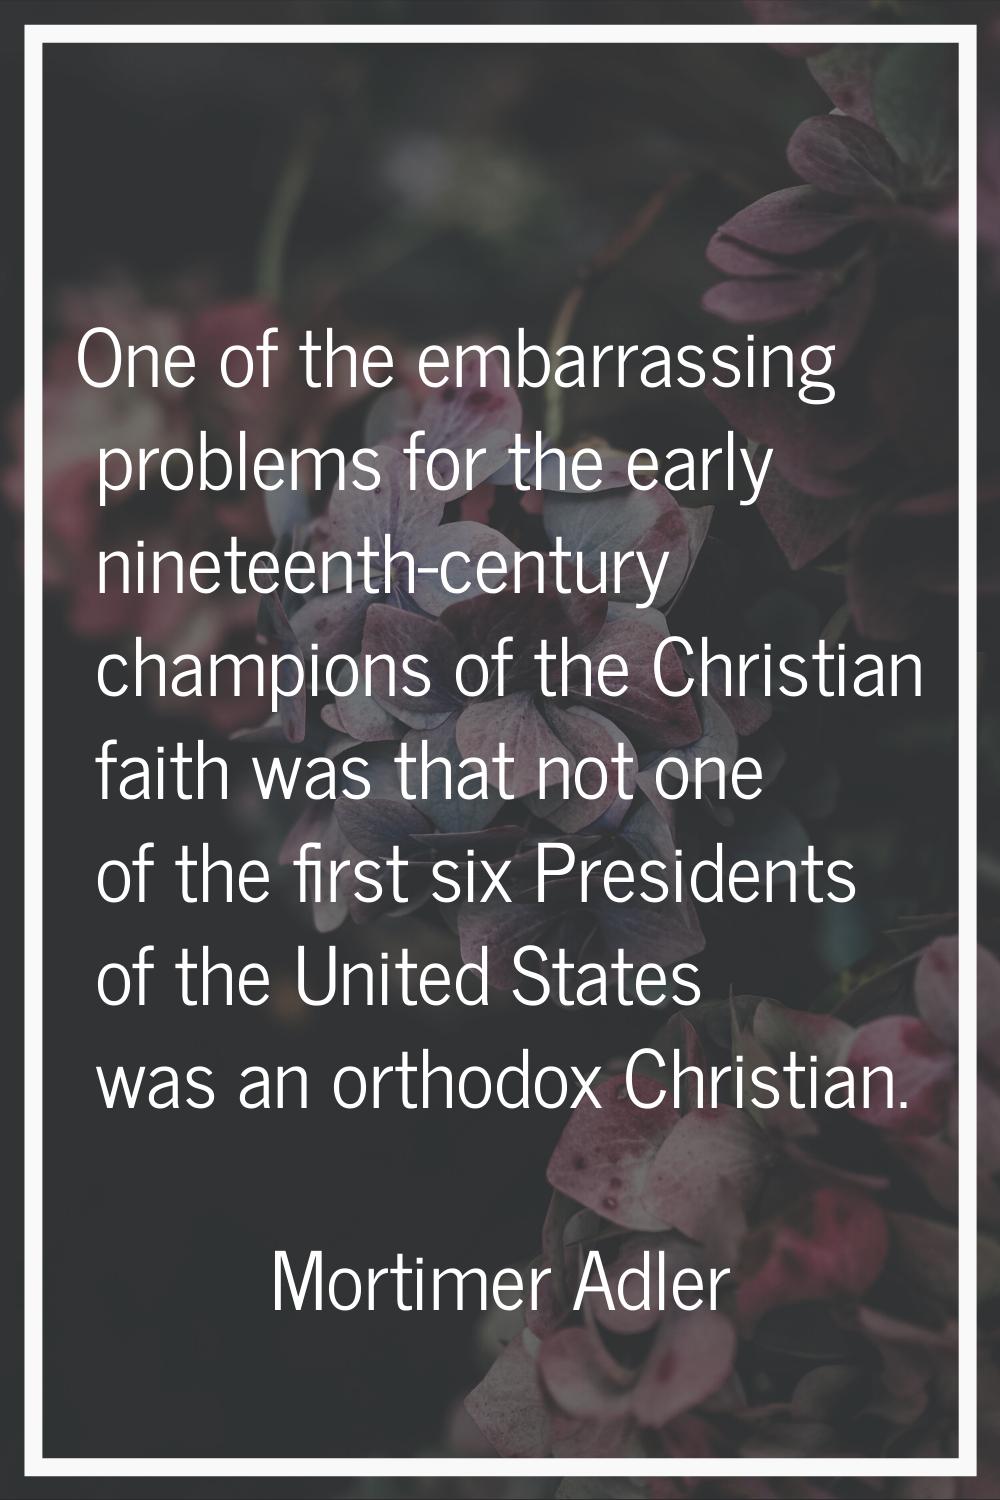 One of the embarrassing problems for the early nineteenth-century champions of the Christian faith 